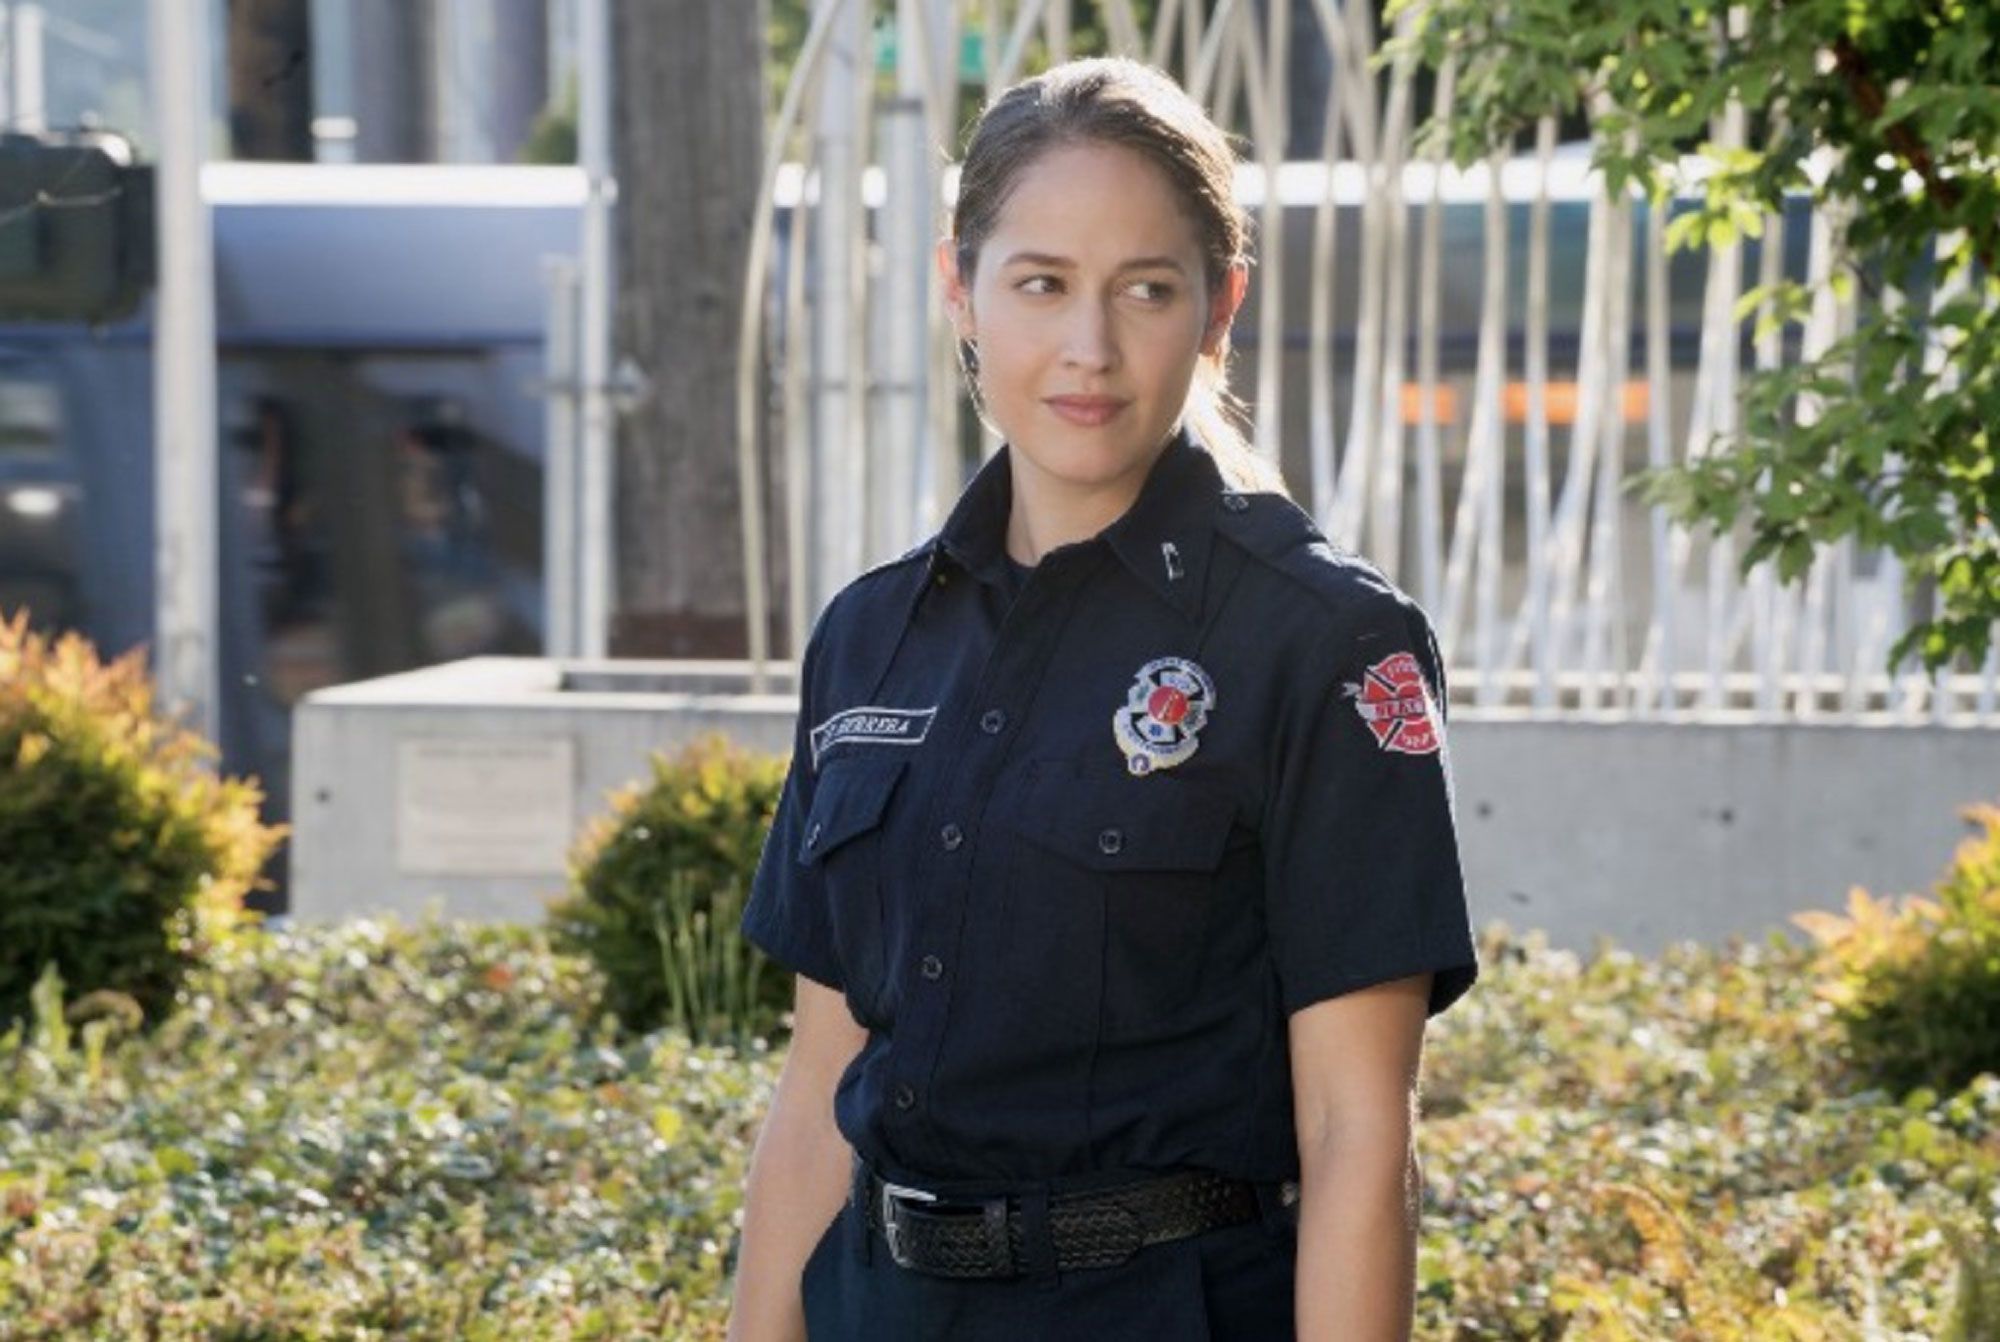 Station 19 season 5 release date, cast, episodes and more